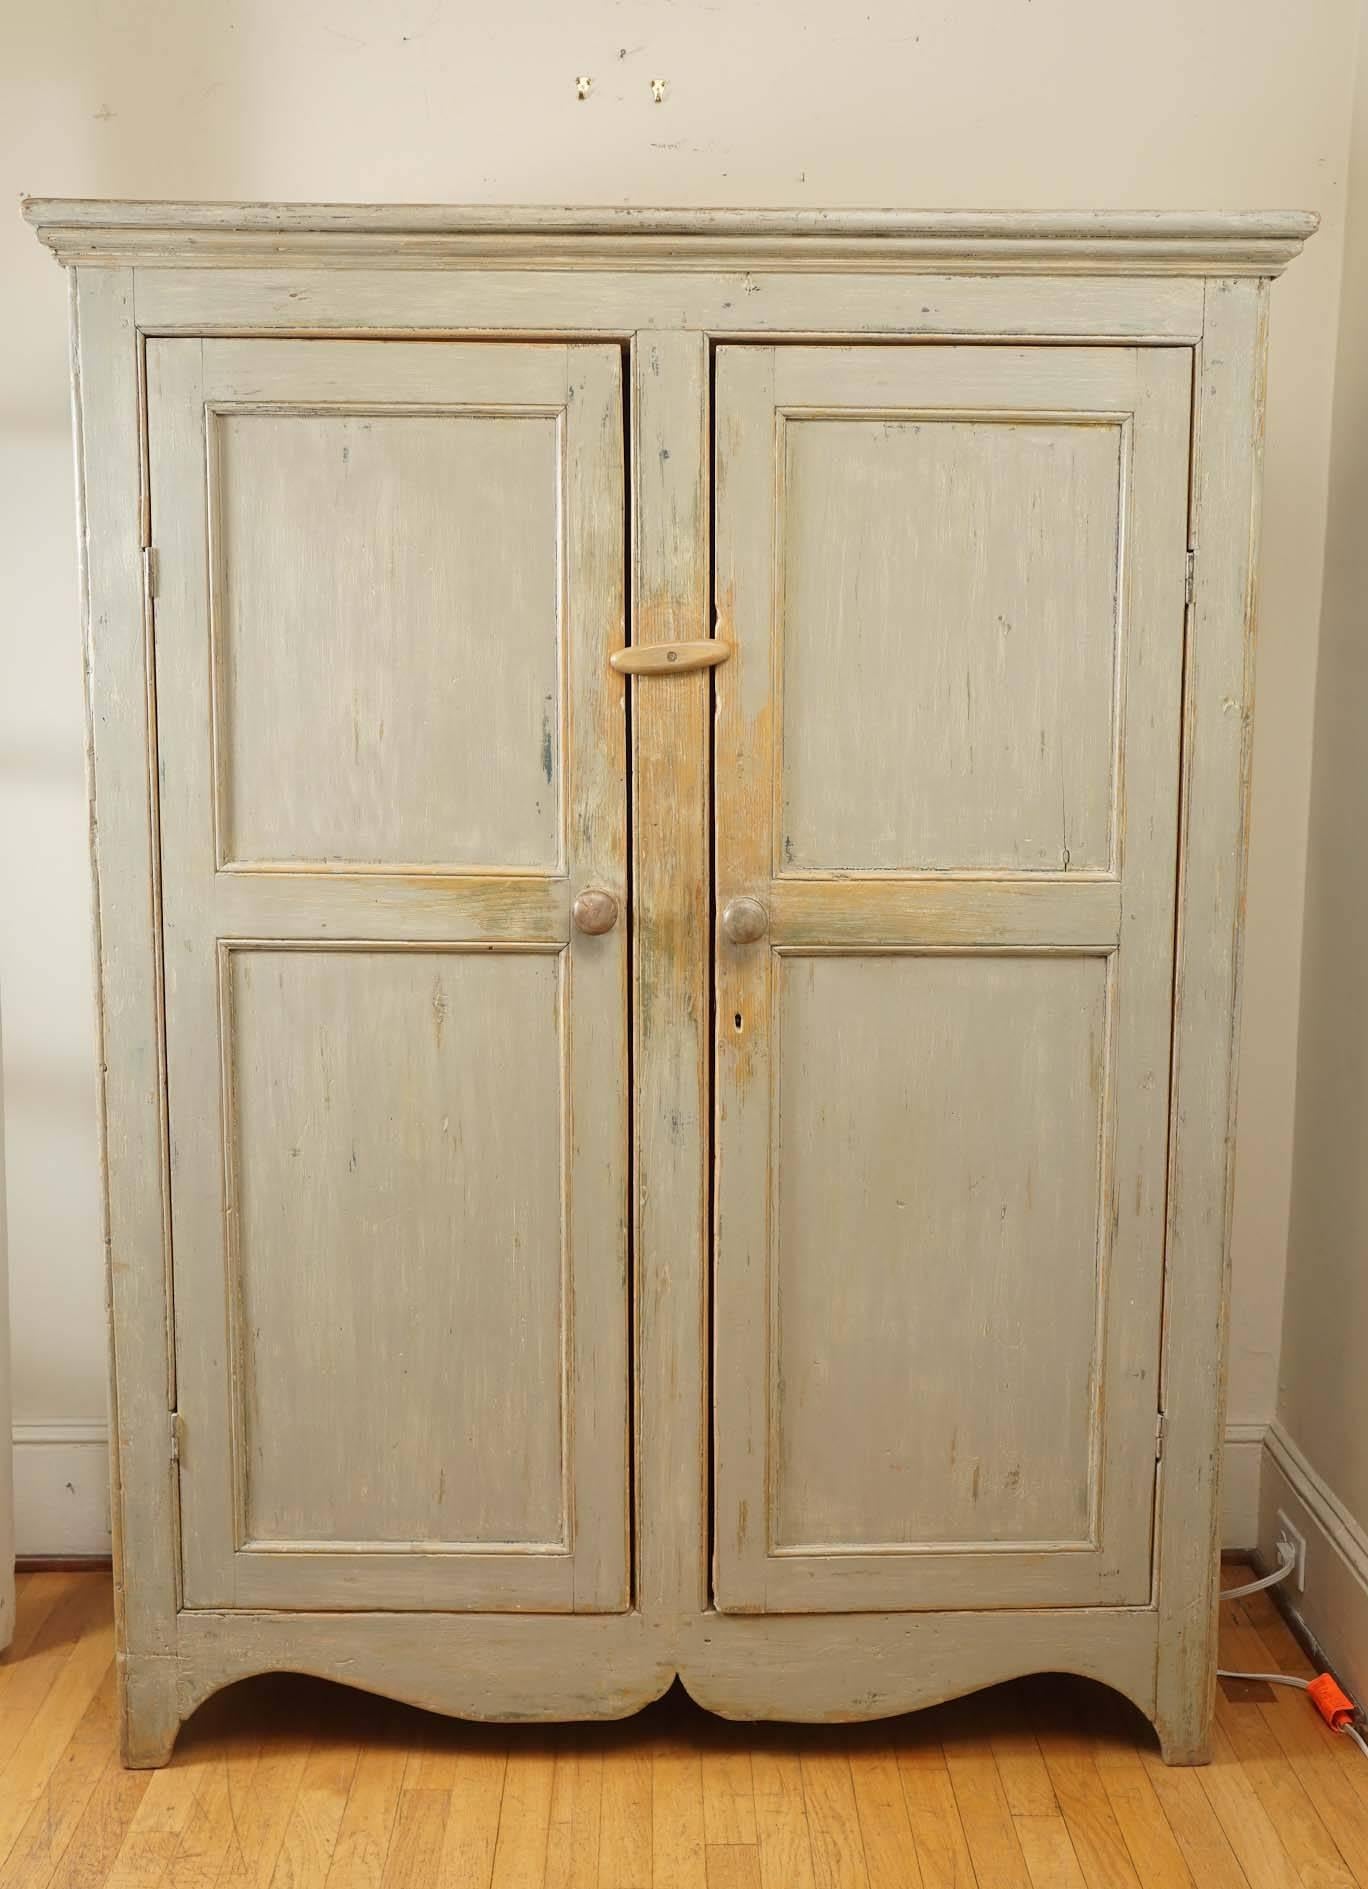 This gorgeous painted armoire is a very soft light green color and has a beautiful scalloped bottom. Inside is a roll bar to hang clothes and has paneling on the sides to match the top. It is a nice sized piece of furniture without being massive yet